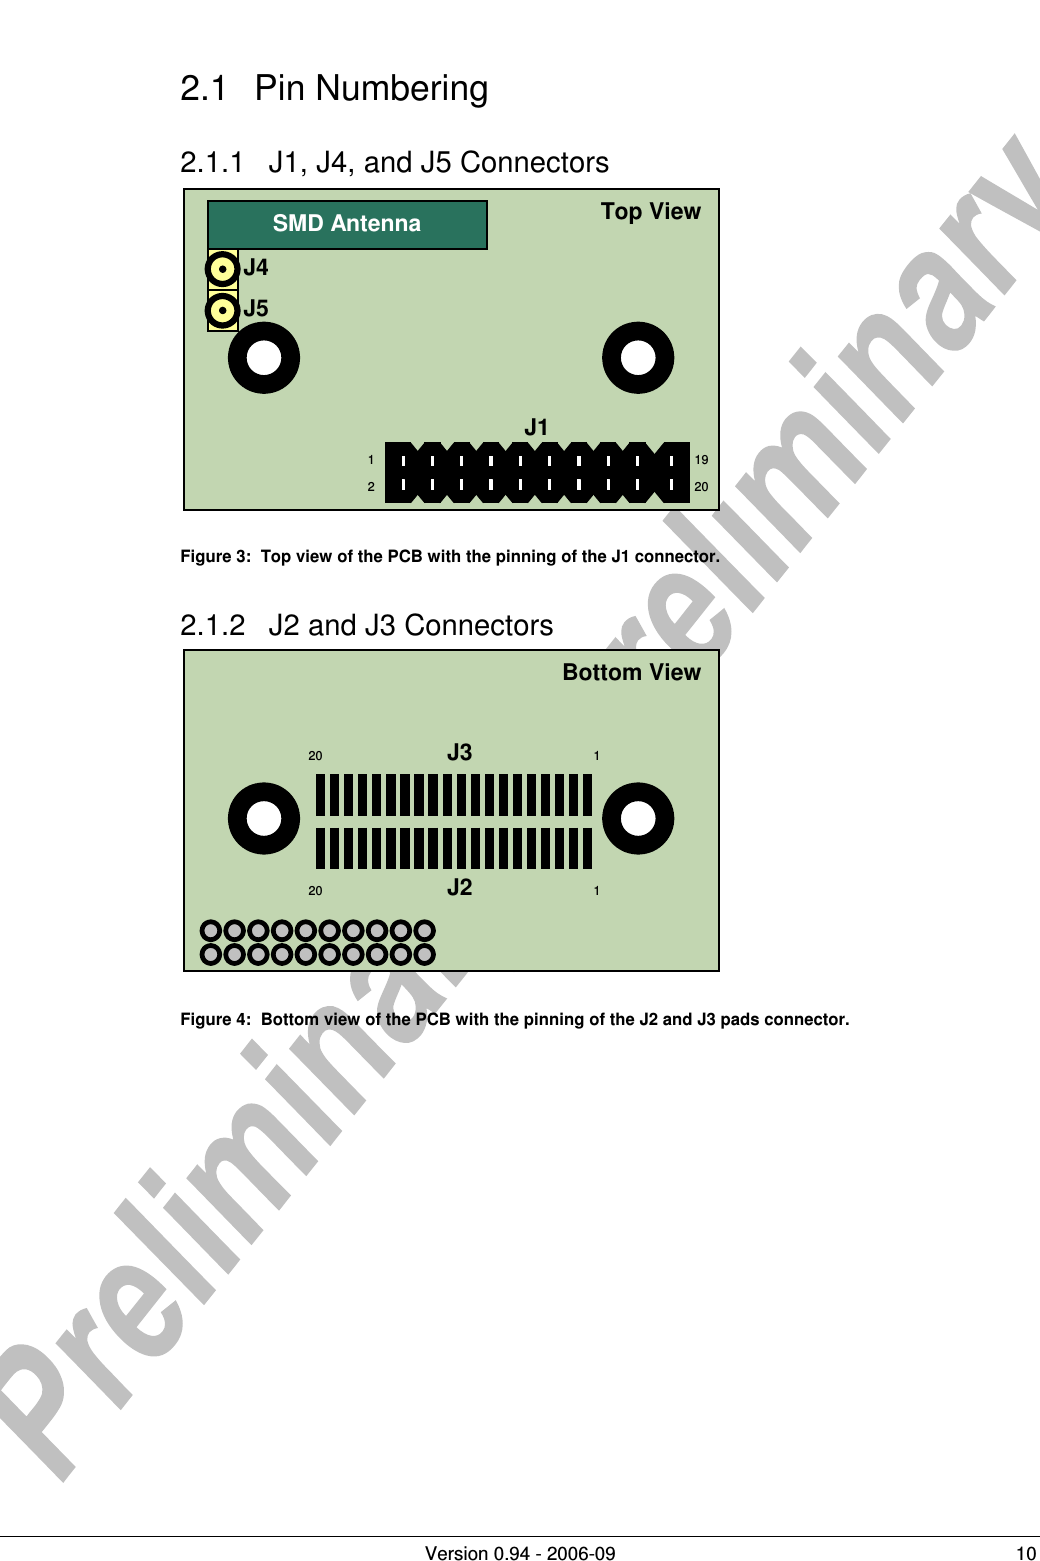          Version 0.94 - 2006-09  10 2.1  Pin Numbering 2.1.1  J1, J4, and J5 Connectors           Figure 3:  Top view of the PCB with the pinning of the J1 connector. 2.1.2  J2 and J3 Connectors           Figure 4:  Bottom view of the PCB with the pinning of the J2 and J3 pads connector. Top View1 2 19 20 J1 Bottom View1 20 20  1 J2 J3 SMD Antenna J4 J5 